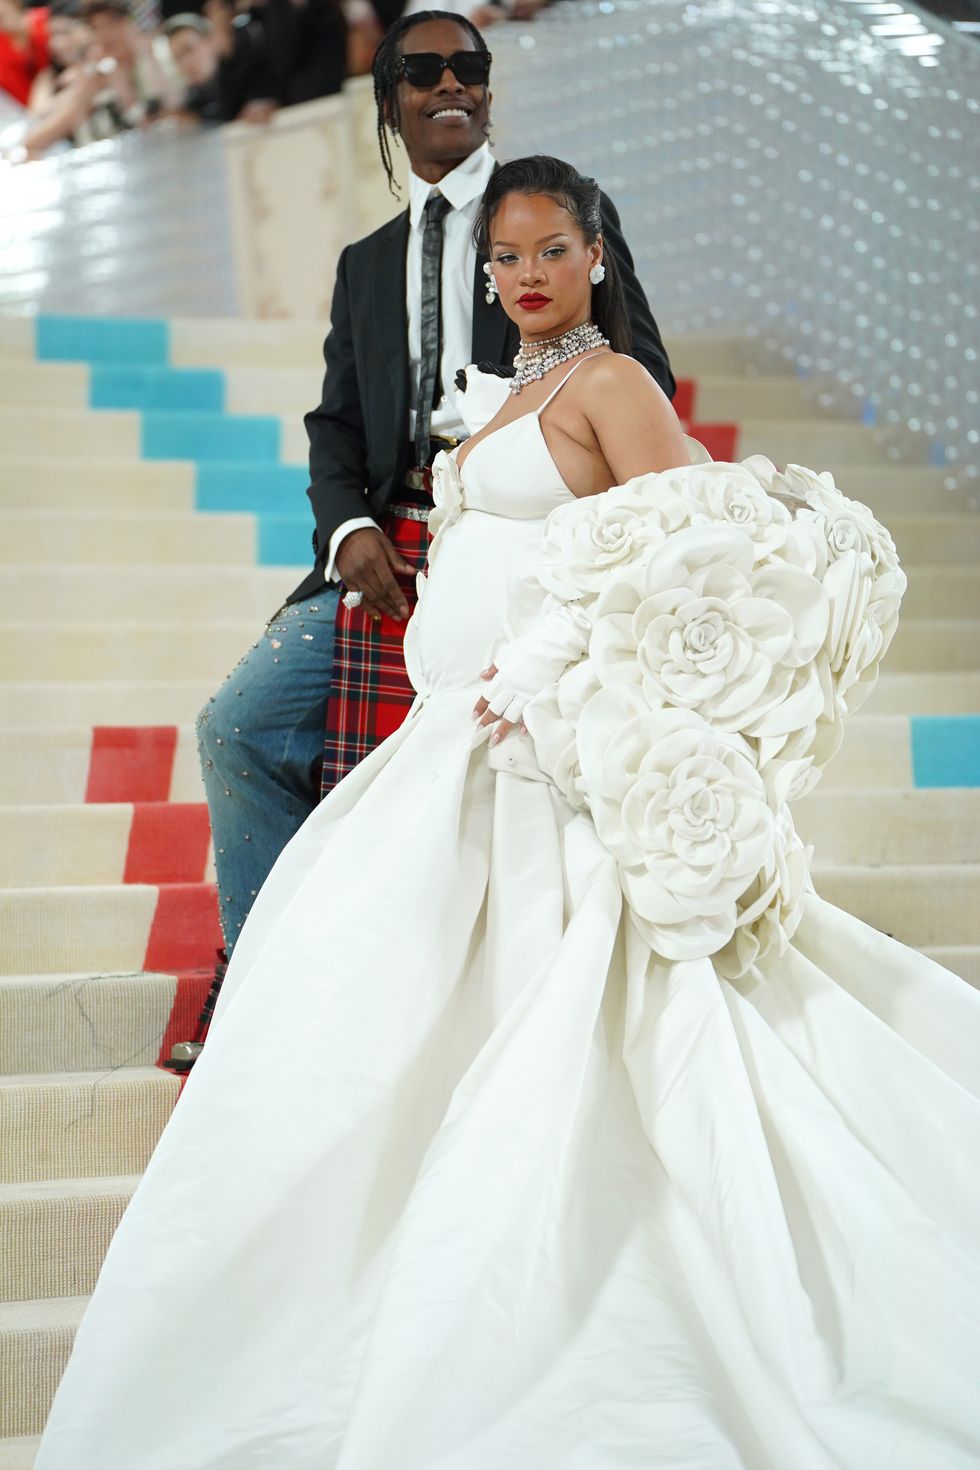 Rihanna, A$AP Rocky to get married in Barbados this year?